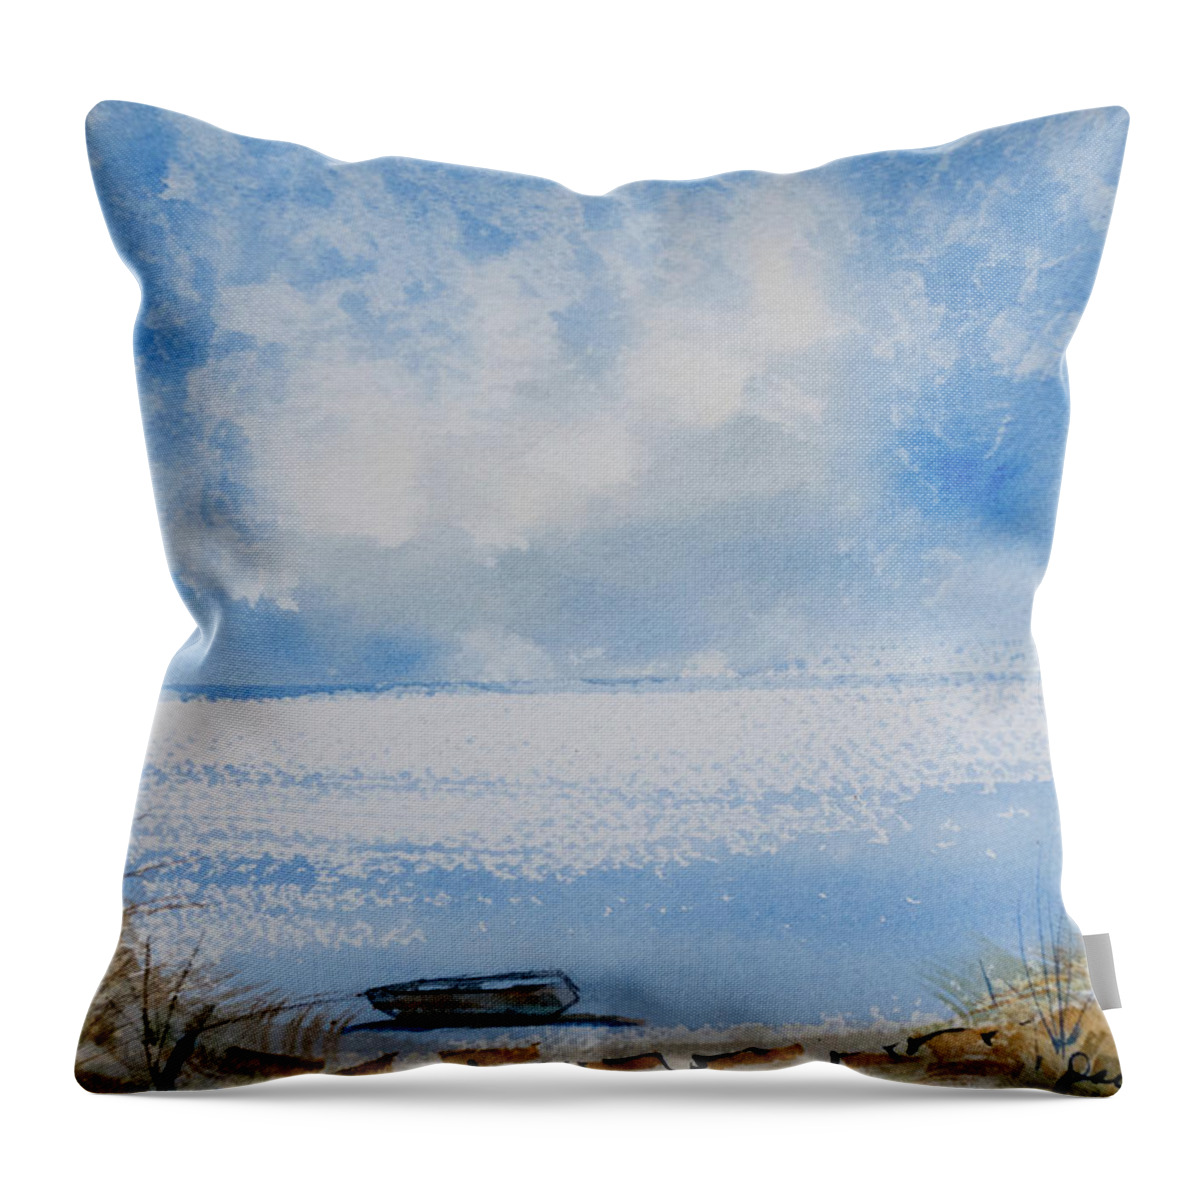 Afternoon Throw Pillow featuring the painting Waiting for Sailor's Return by Dorothy Darden